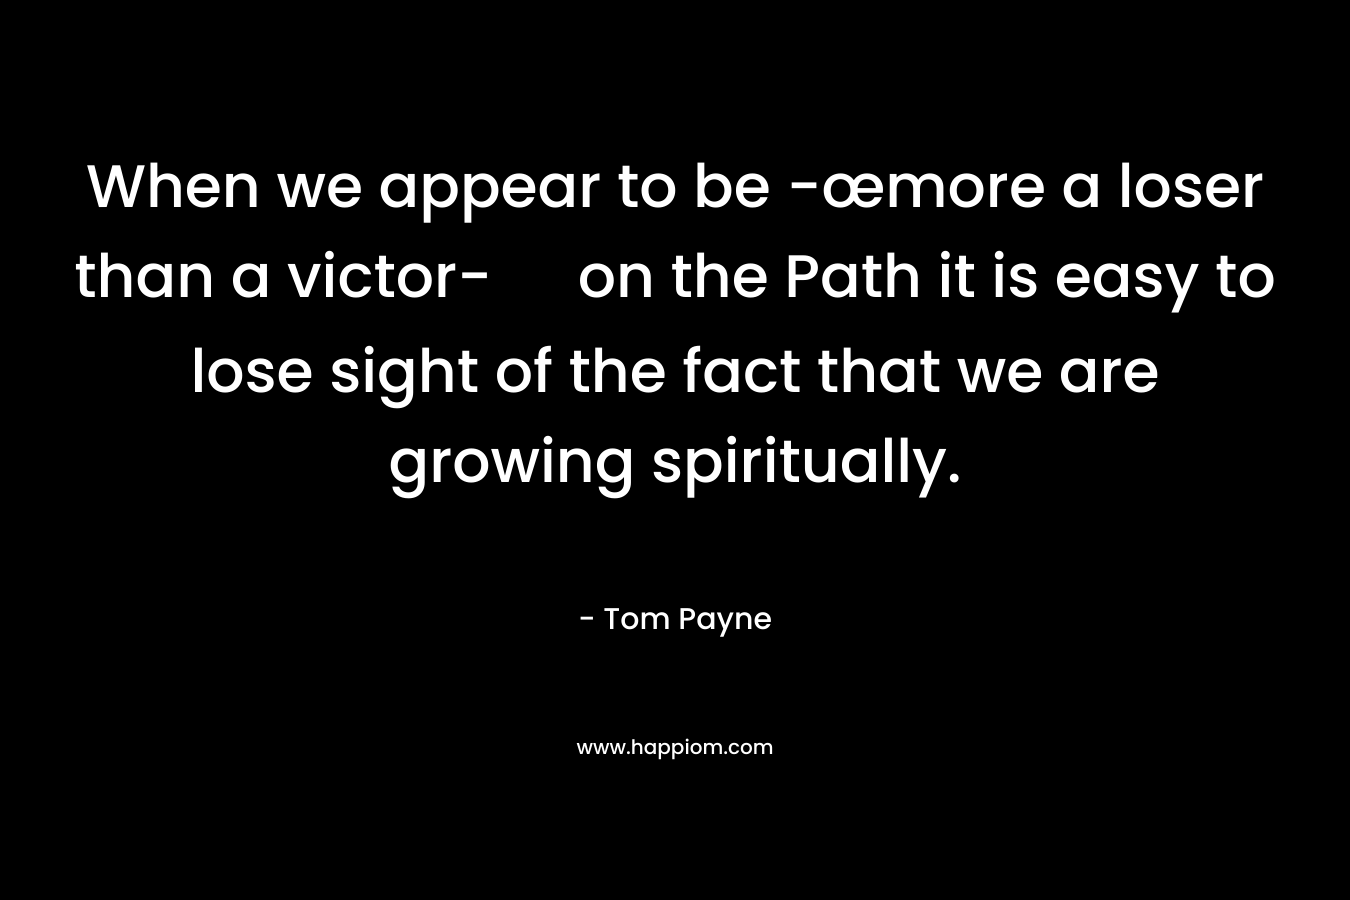 When we appear to be -œmore a loser than a victor- on the Path it is easy to lose sight of the fact that we are growing spiritually.